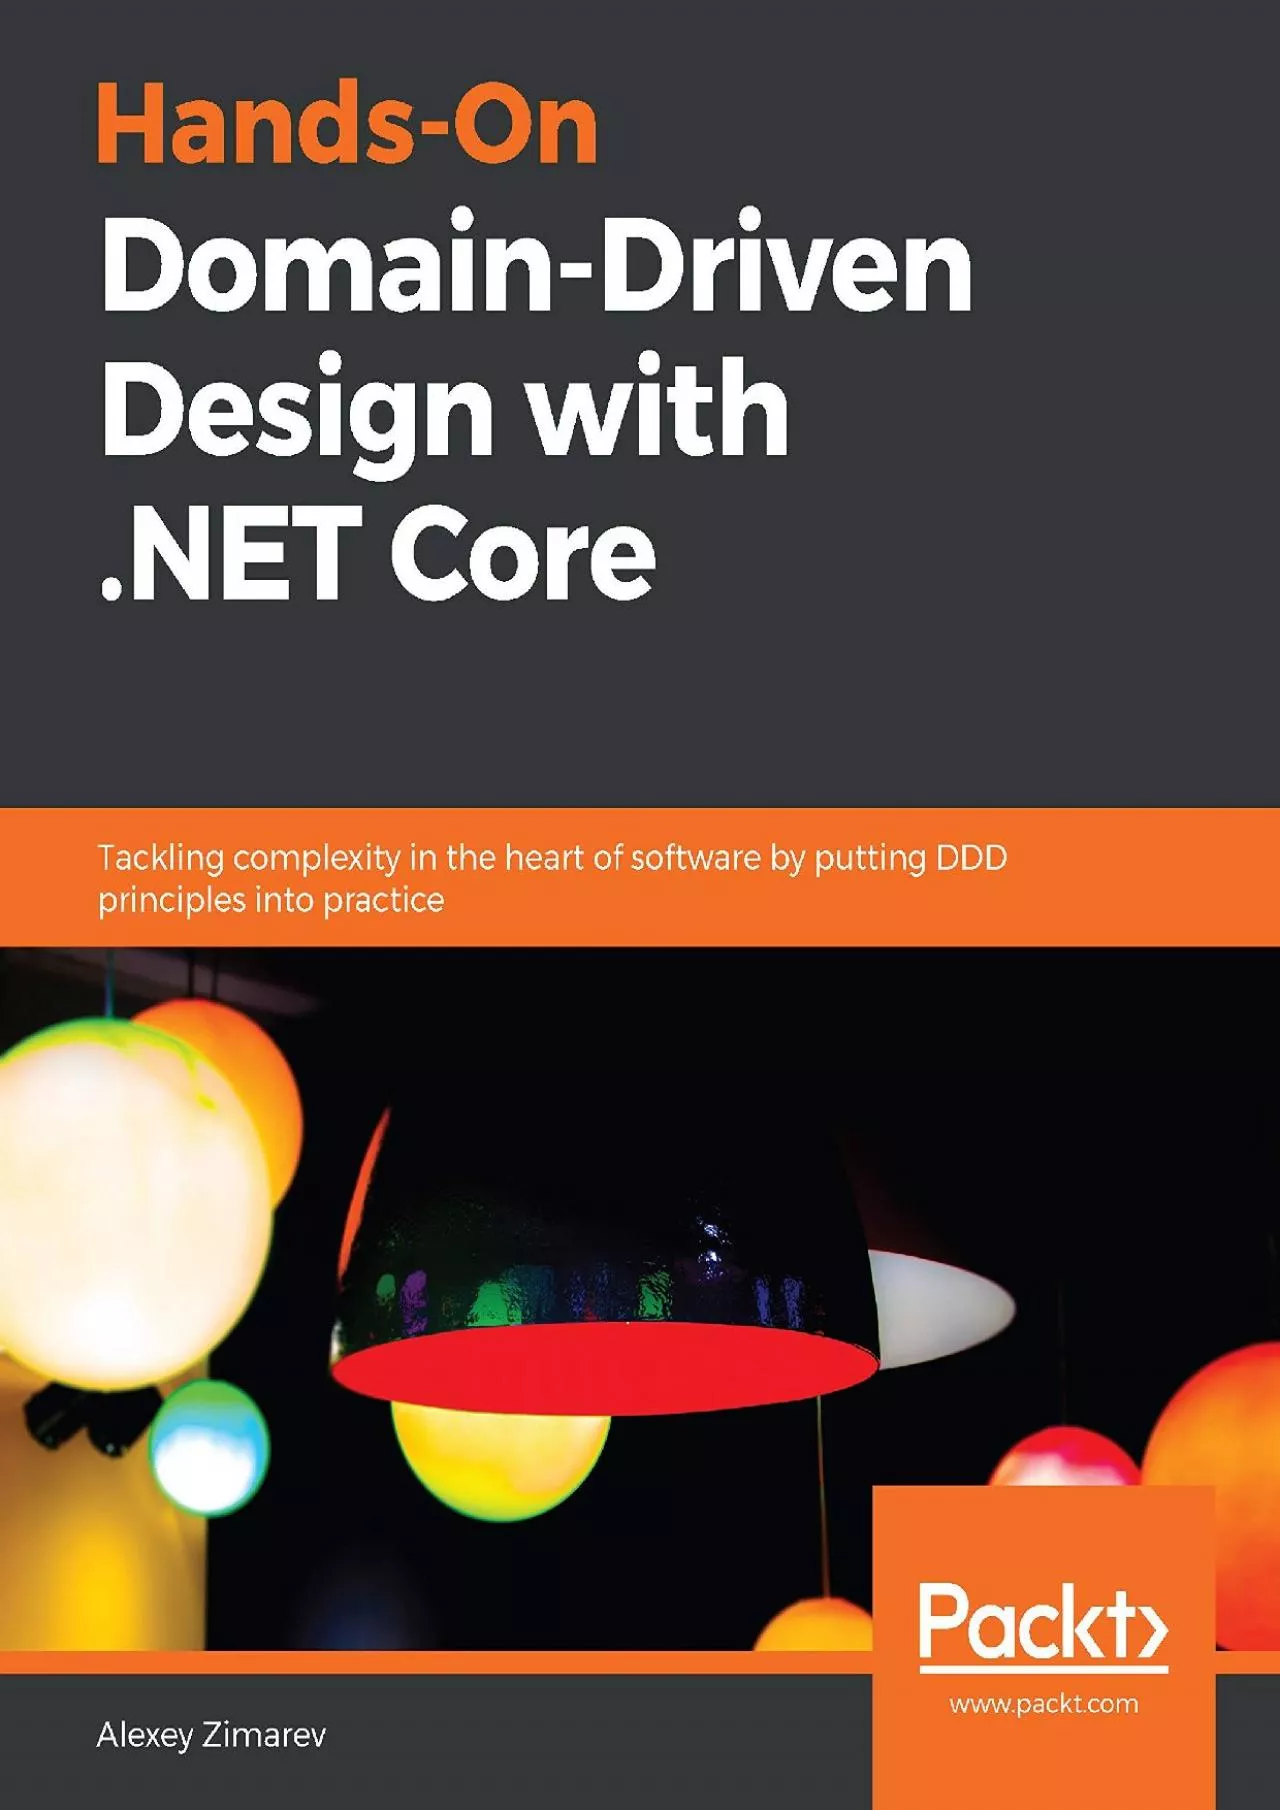 [READING BOOK]-Hands-On Domain-Driven Design with .NET Core: Tackling complexity in the